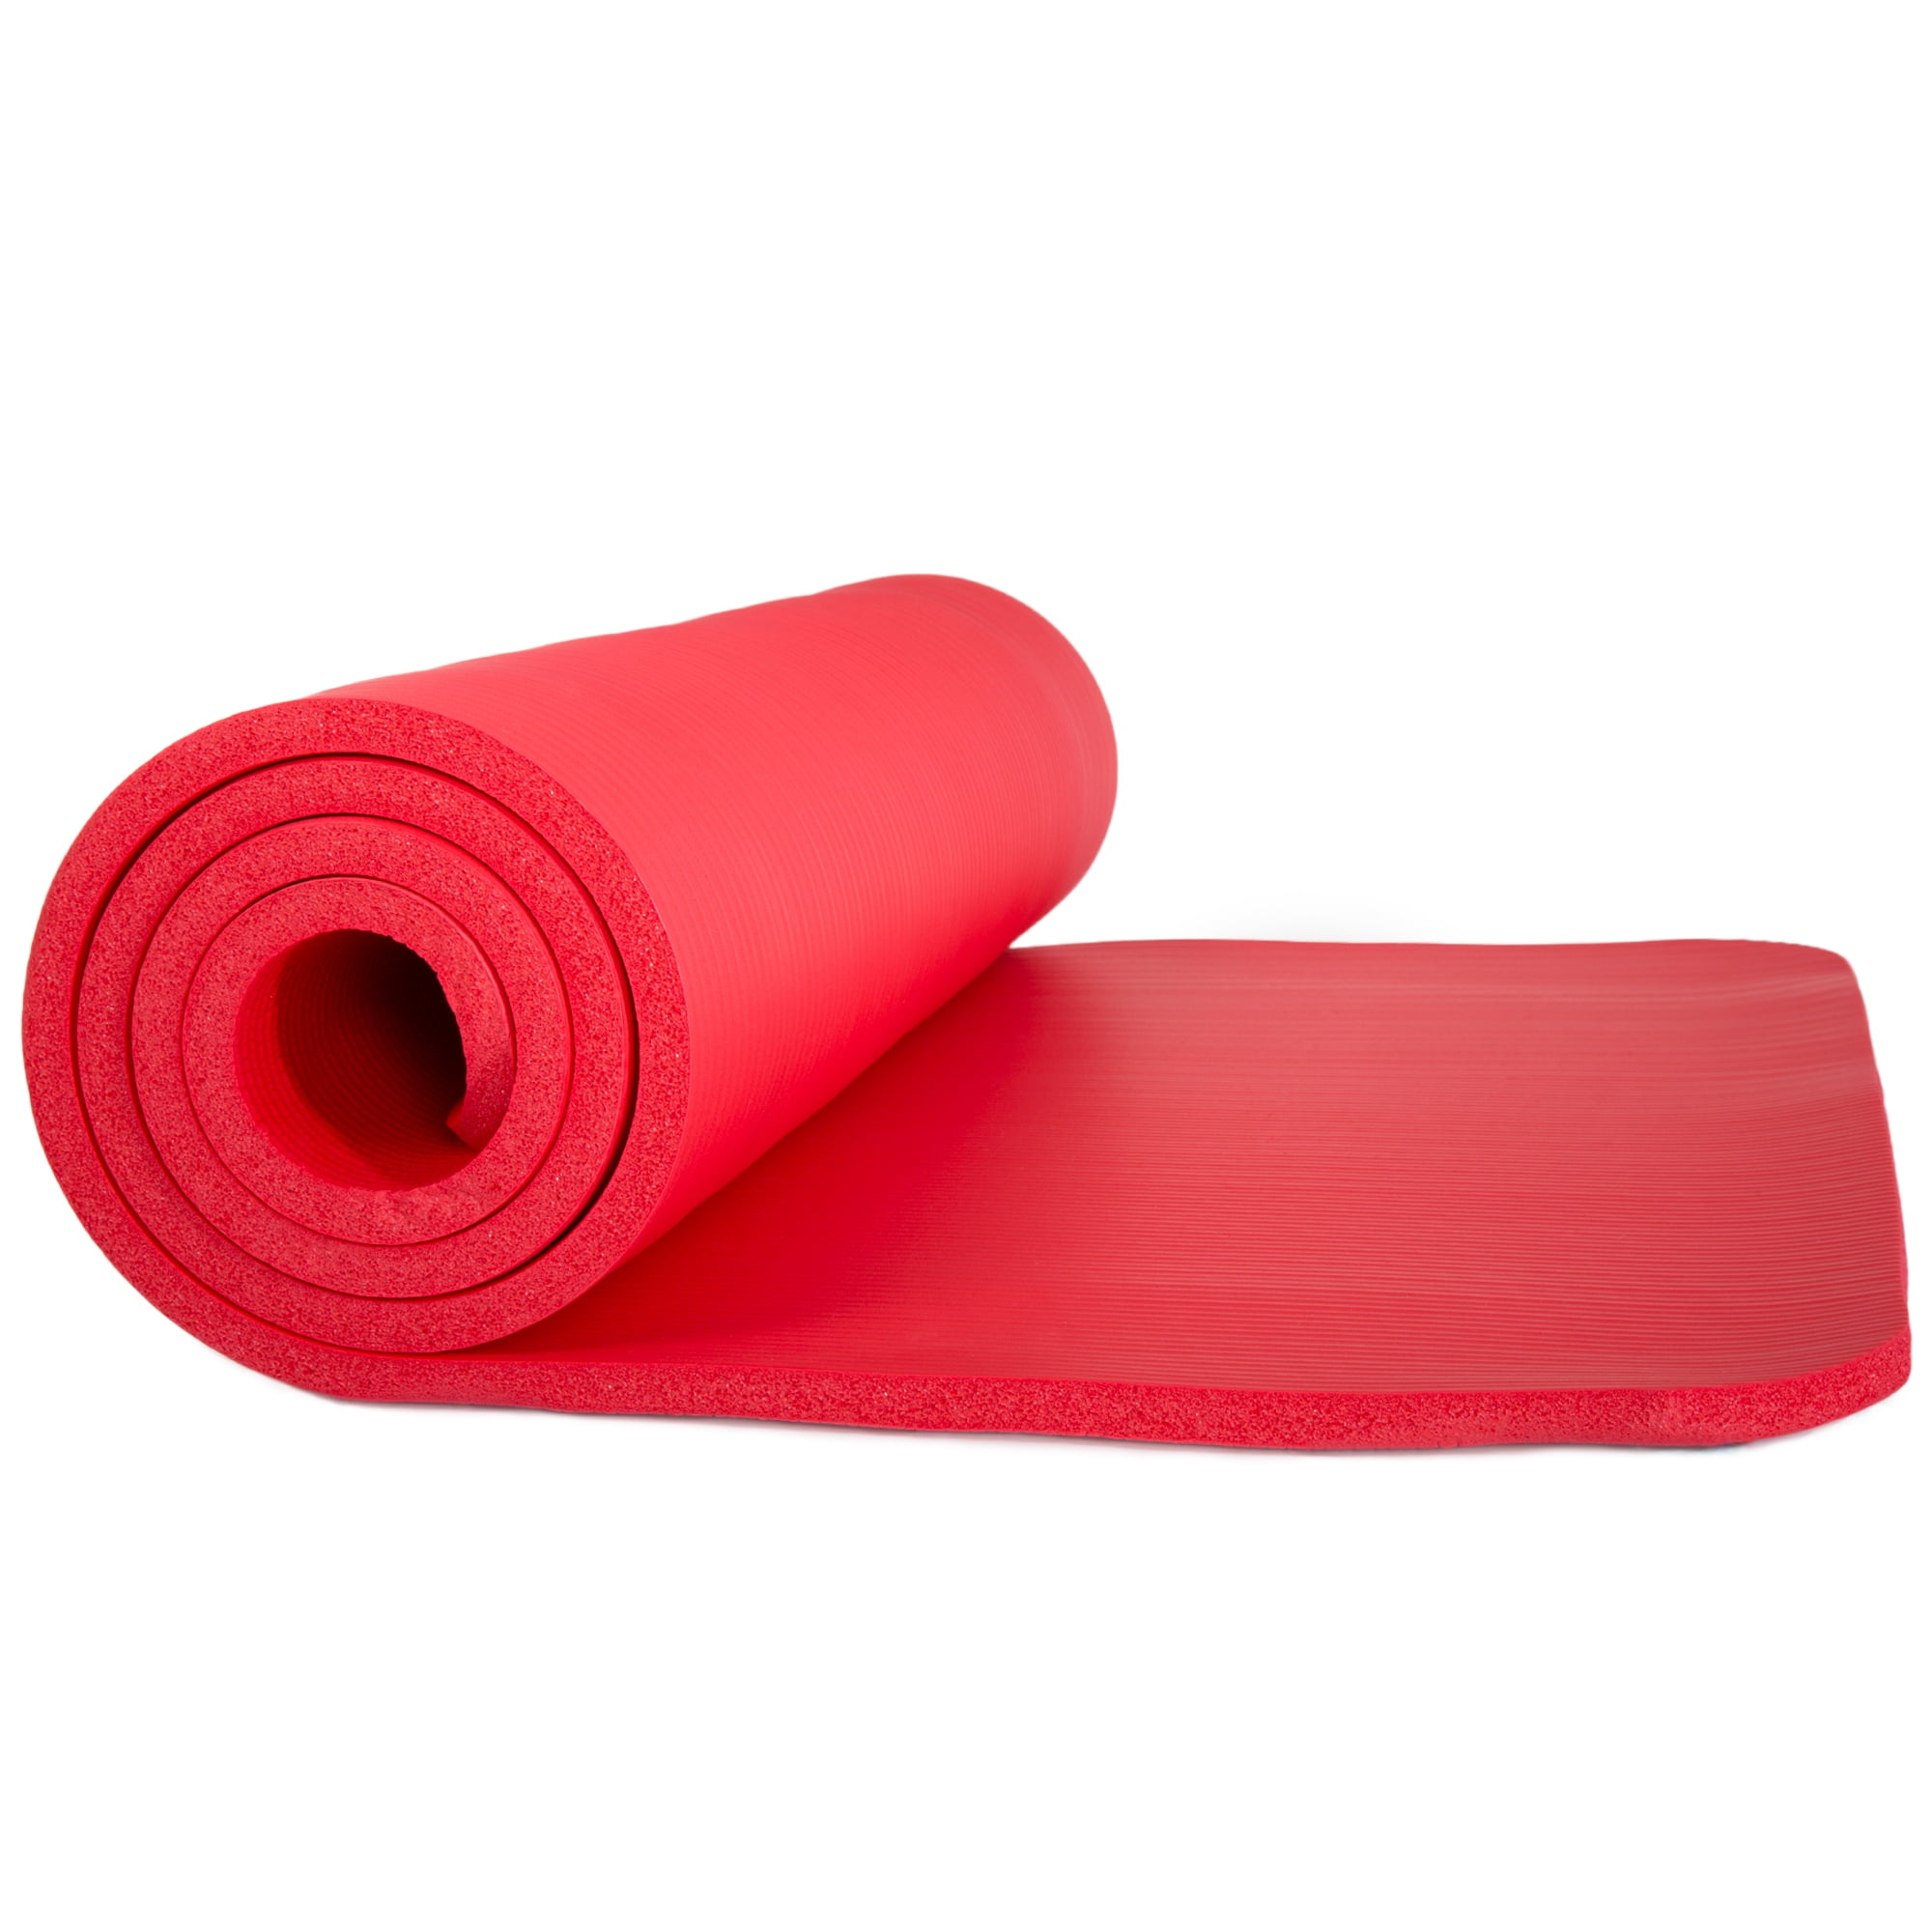 Sleeping Pad, Lightweight Non Slip Foam Mat with Carry Strap by